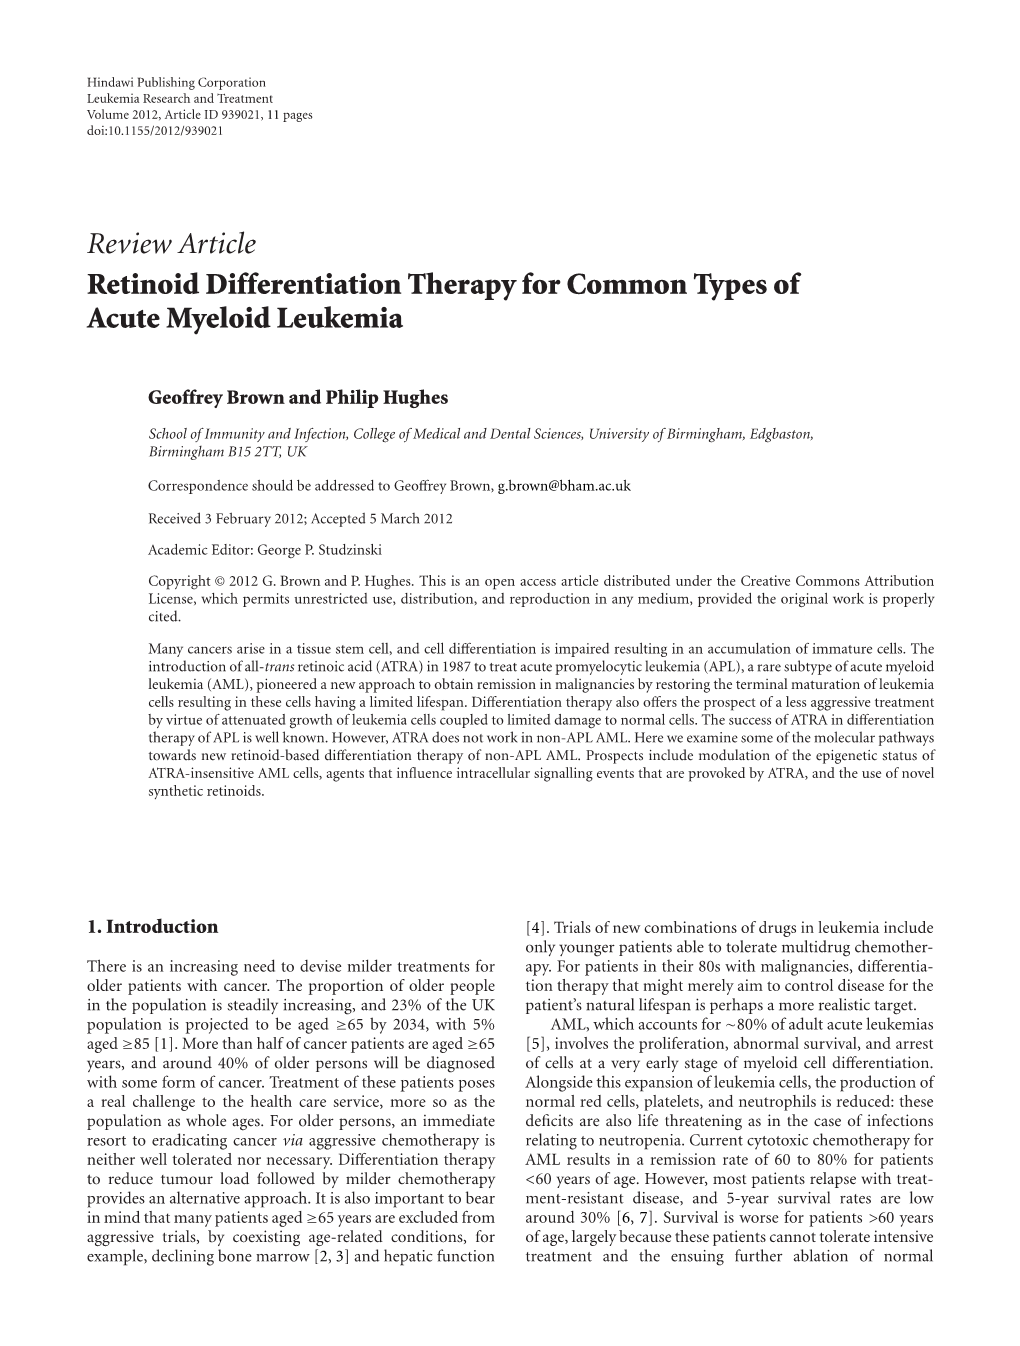 Retinoid Differentiation Therapy for Common Types of Acute Myeloid Leukemia